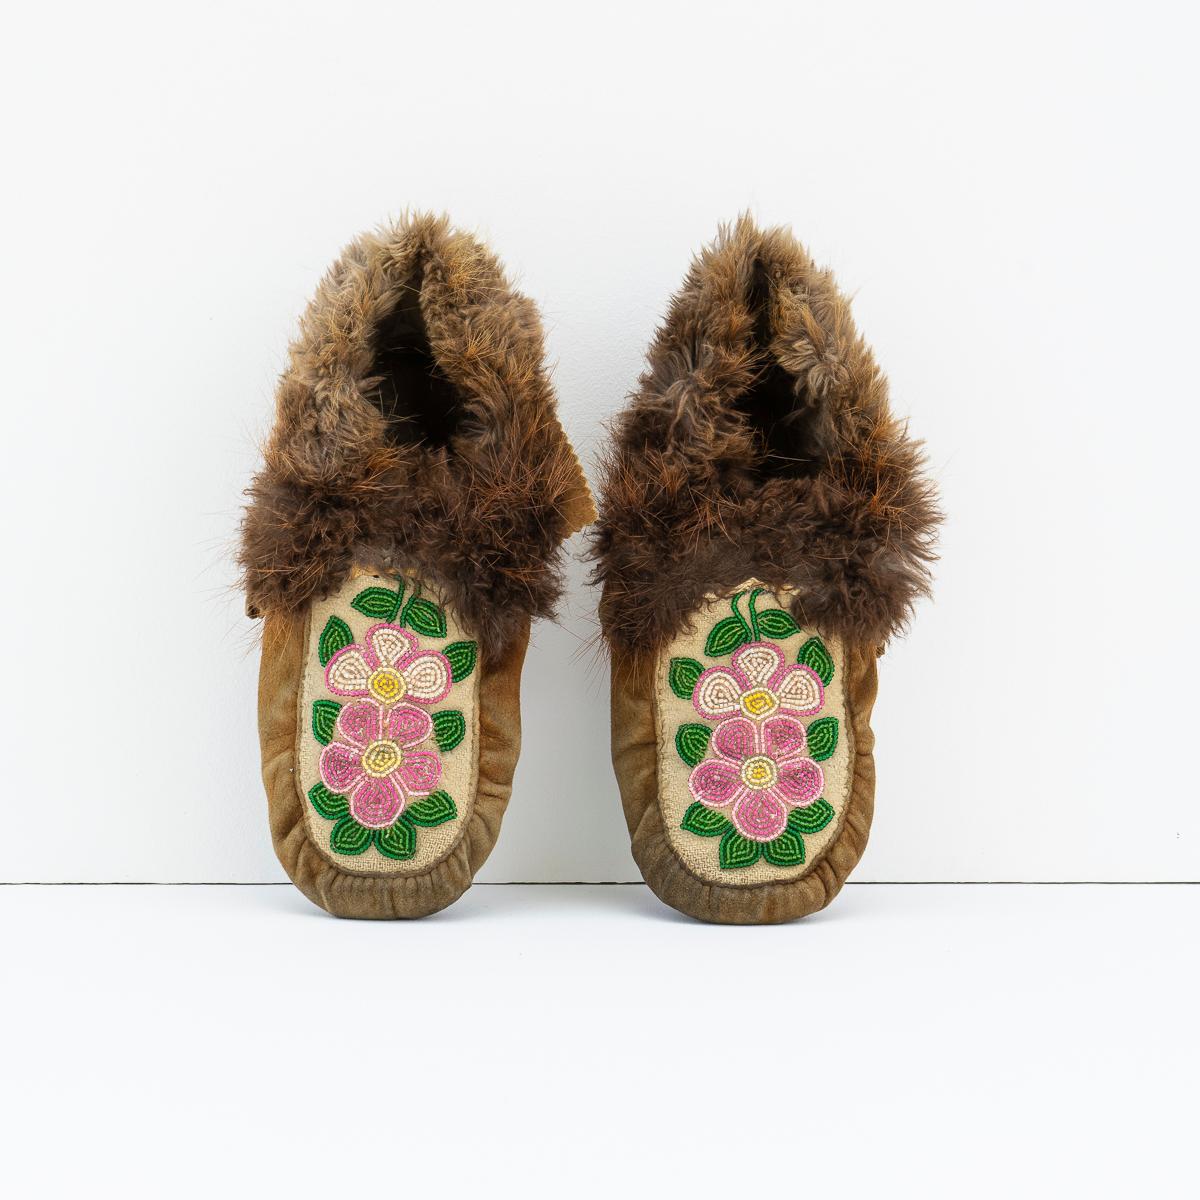 TRADITIONAL OJIBWAY TRIBAL SHOES WITH FLORAL BEAD DETAILING
Originating from the Ojibwe (Ojibwa) people from what is currently Southern Canada and the North Mid-Western United States.

Handmade from smoked moose leather with fur